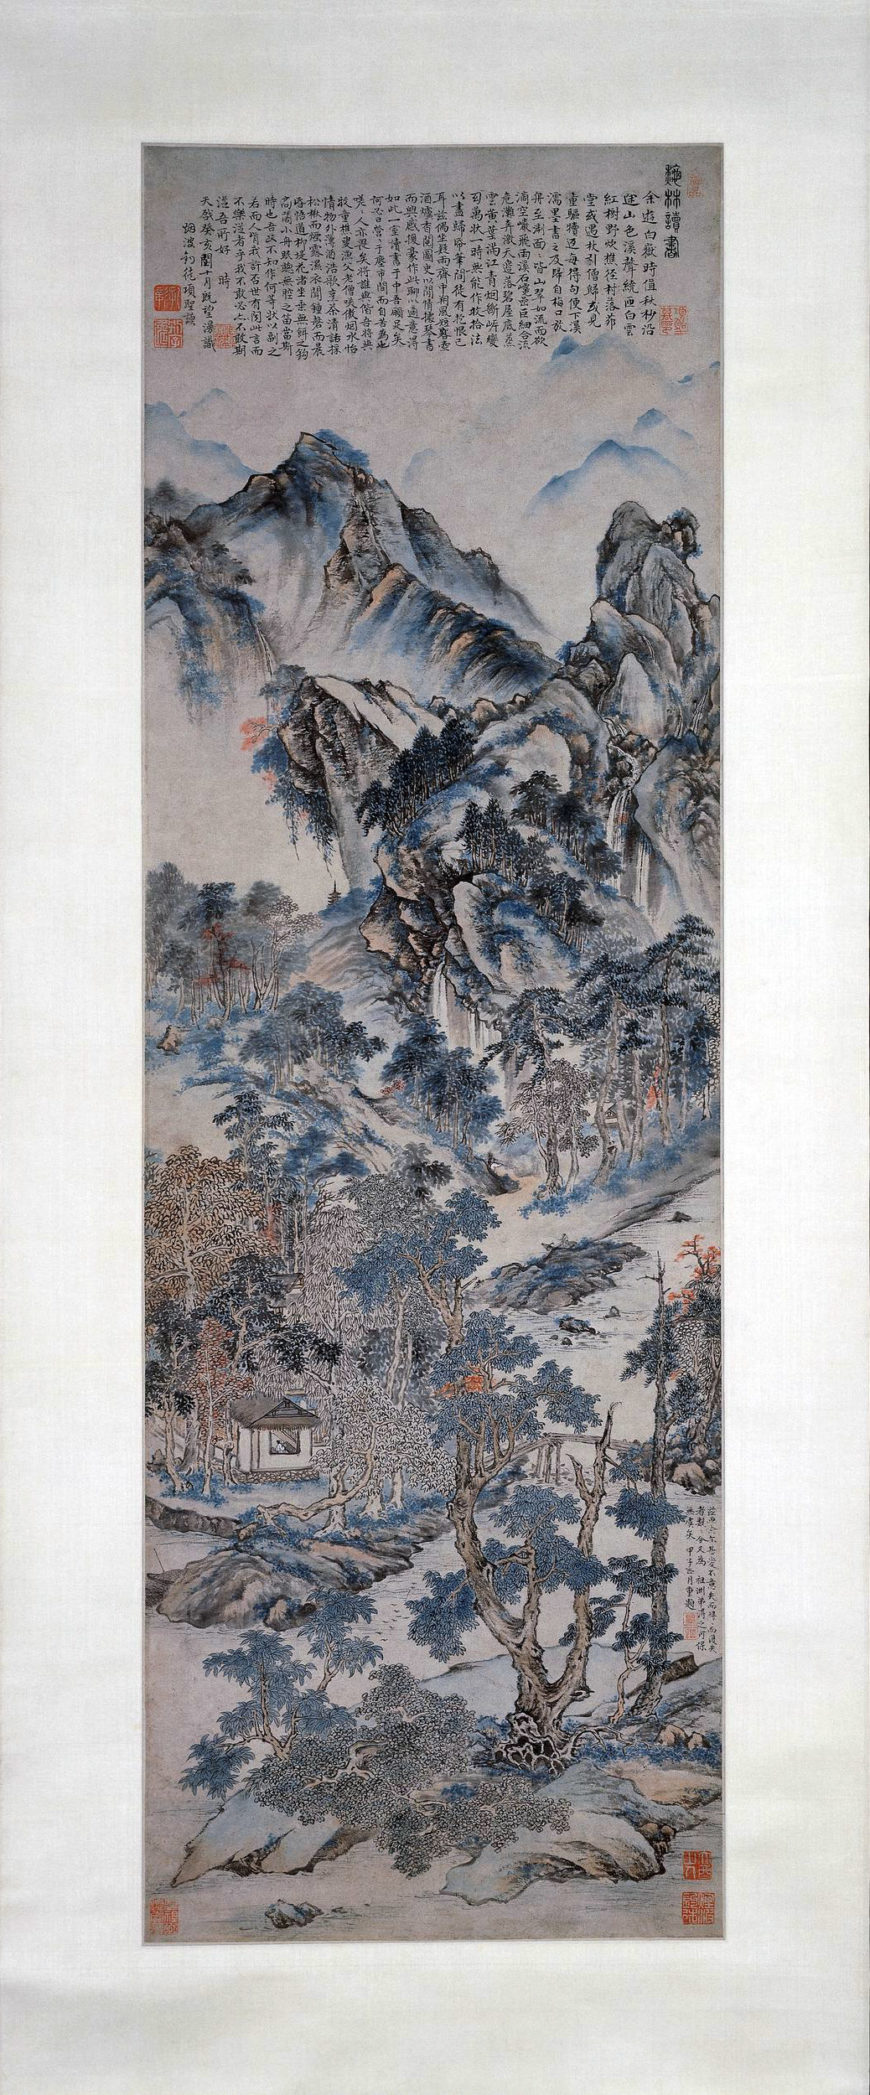 Xiang Shengmo 項聖謨, Reading in the Autumn Forest 秋林讀書圖, 1623, Ming dynasty, ink and color on paper, 198.5 x 52 cm (©Trustees of the British Museum)